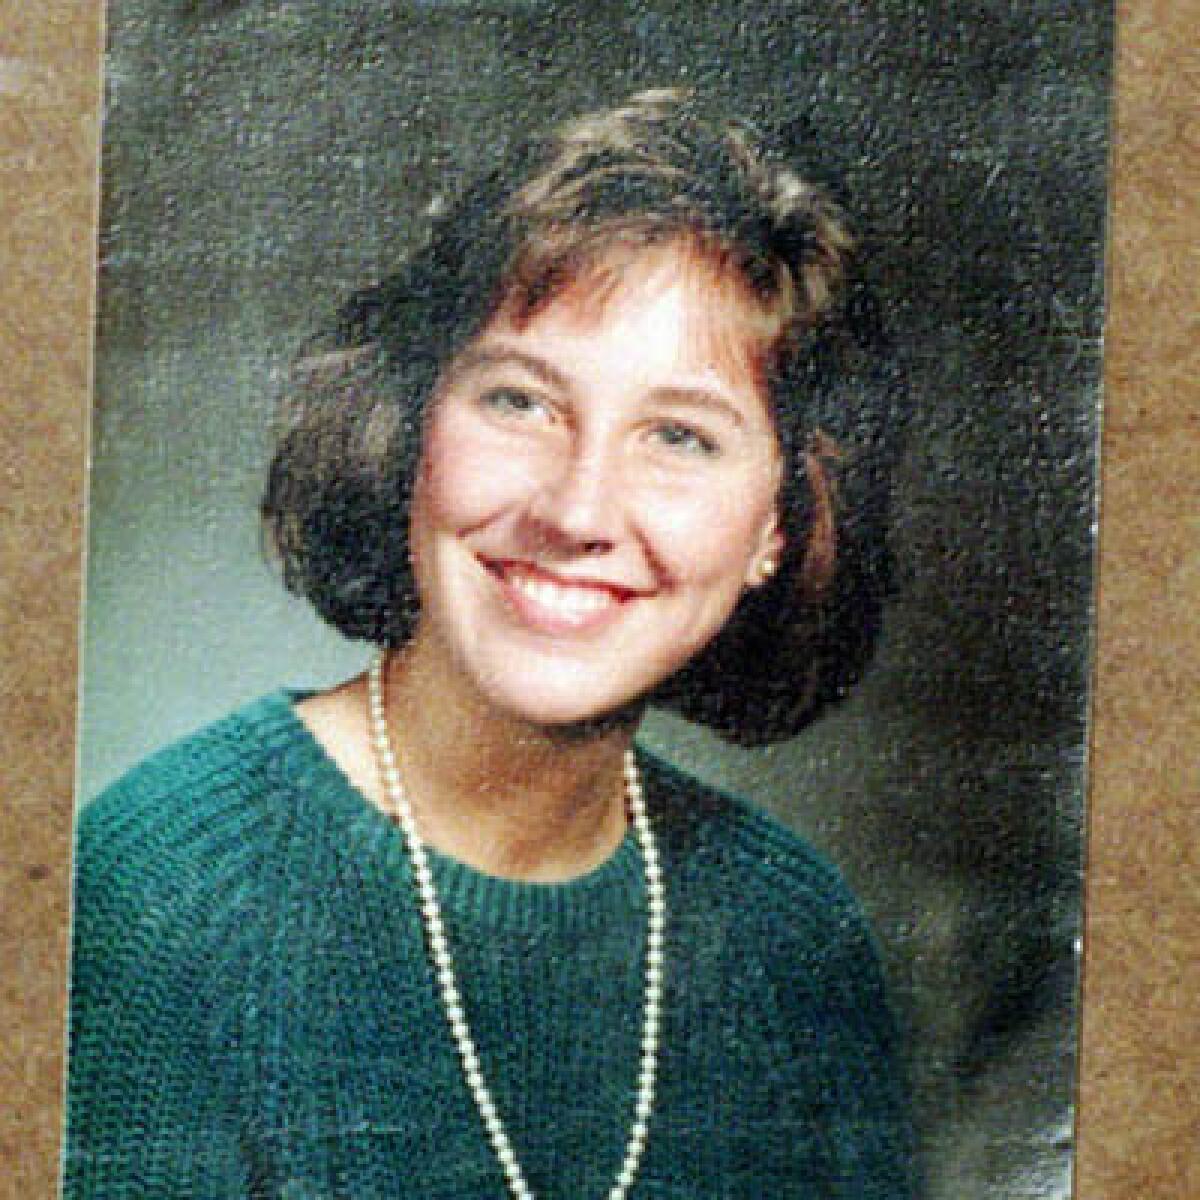 FILE––This is an undated college photo of Shannon Lowney, 25, who was killed by a gunman Friday , Dec. 30, 1994, when he opened fire inside the Planned Parenthood clinic in Brookline, Mass., where Lowney was a receptionist. Three other people in the clinic were also injured before the gunman then entered another nearby clinic killing another woman and injuring two people. The suspect is still being sought by police. (AP Photo/ho)